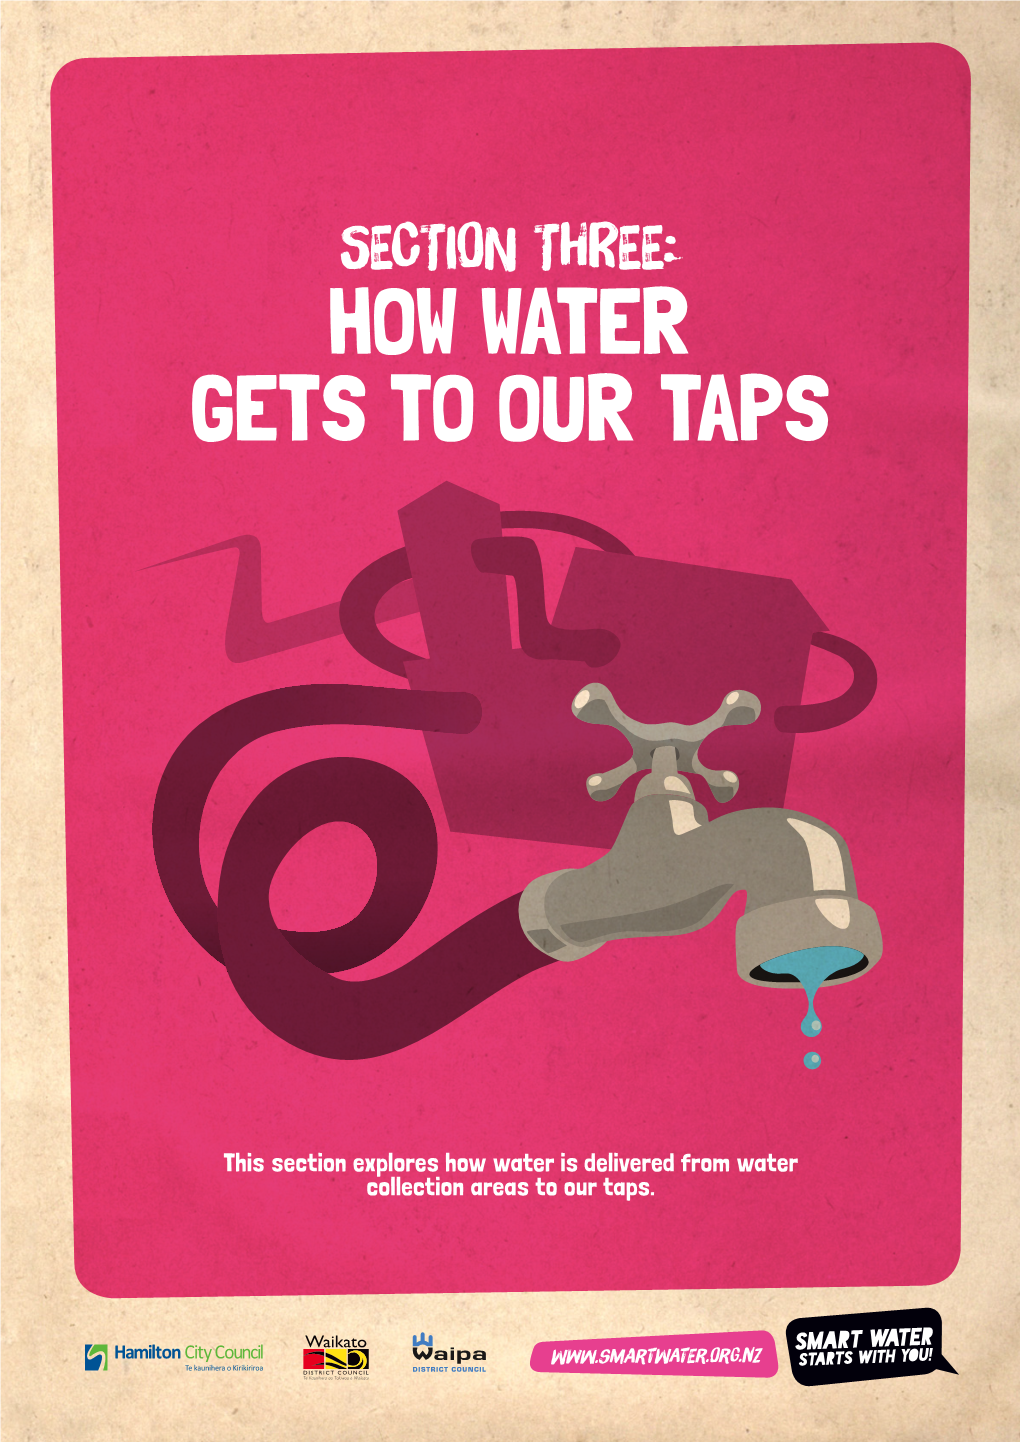 Section Three: How Water Gets to Our Taps